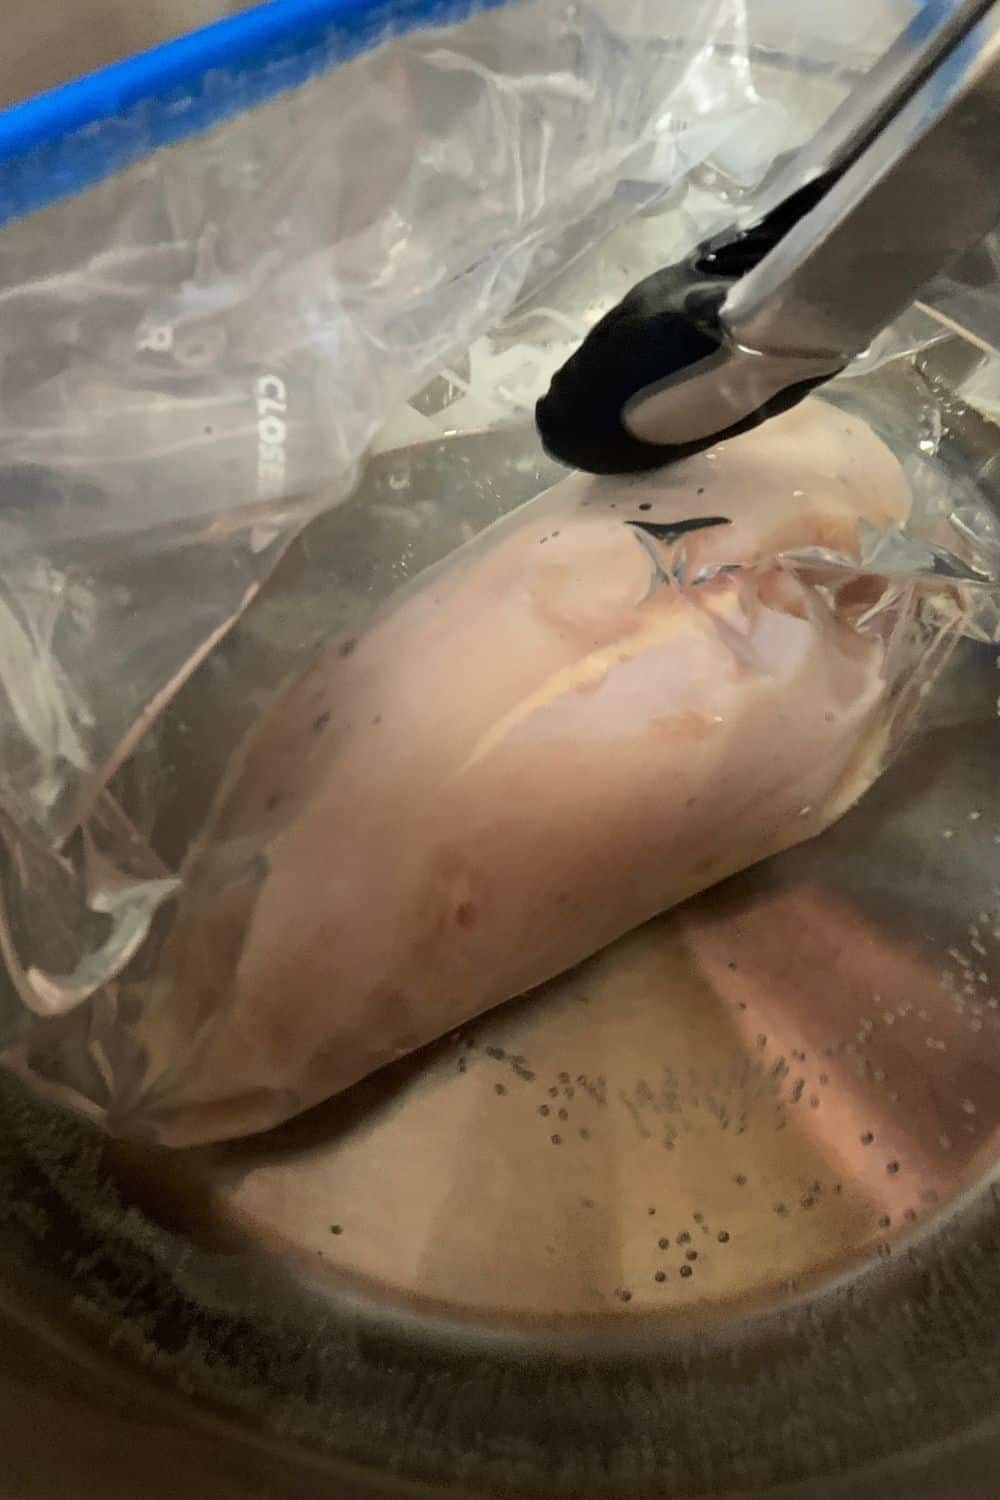 bag of chicken being lowered into the hot water bath of the instant pot